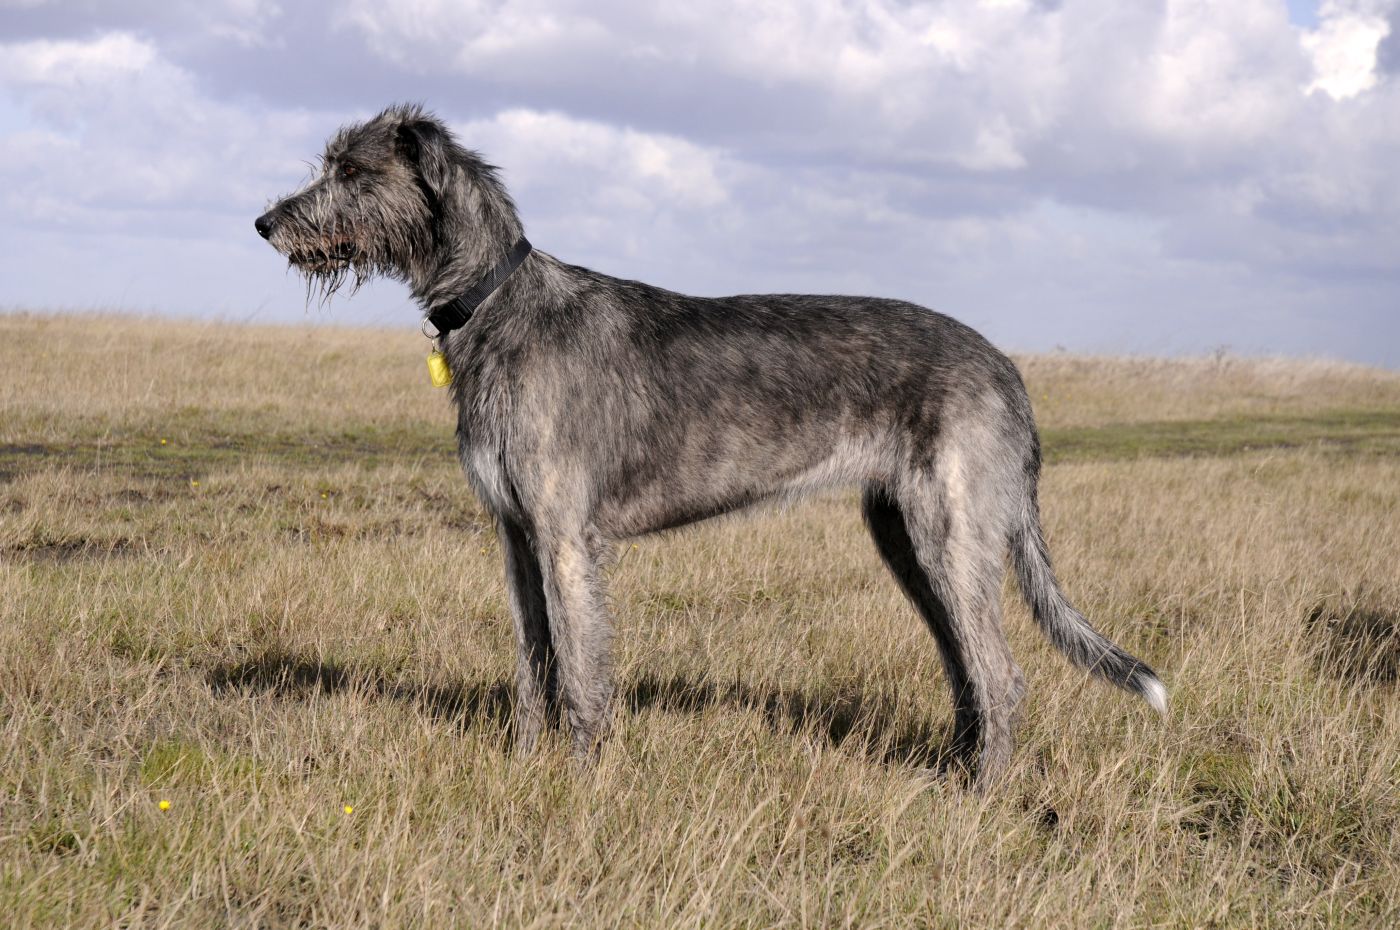 The Tallest Dog Breed is the Irish Wolfhound